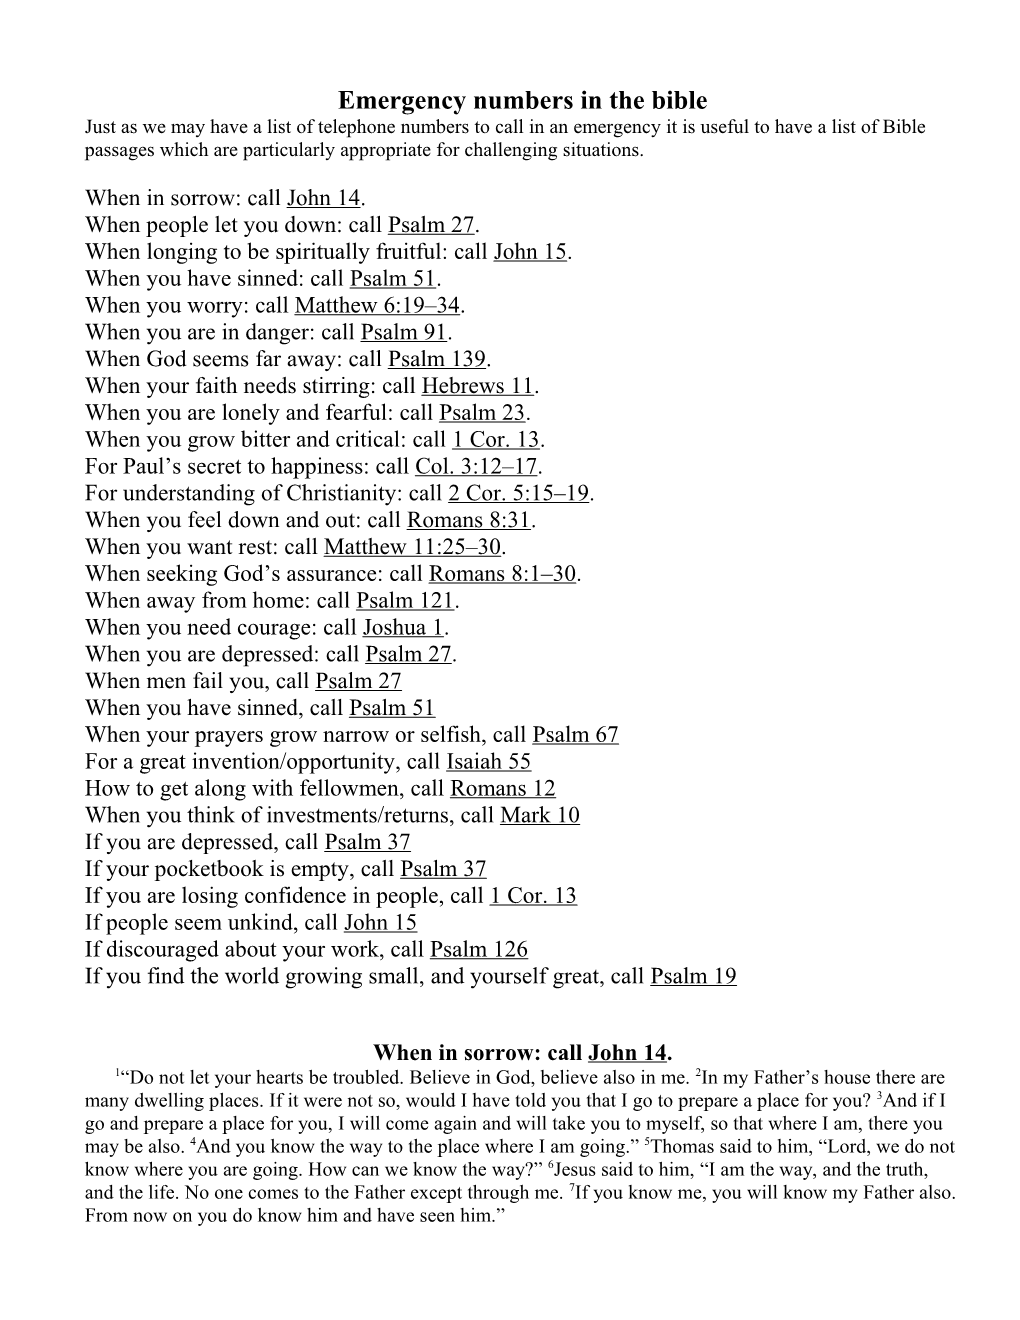 Emergencynumbers in the Bible